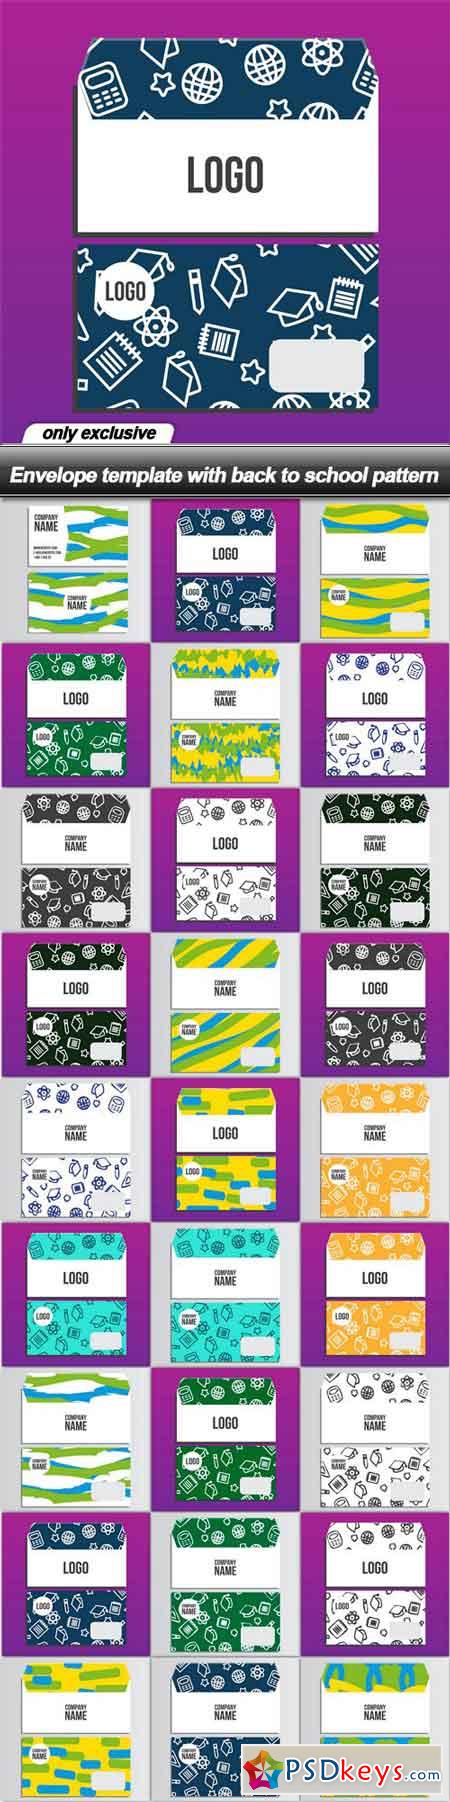 Envelope template with back to school pattern - 26 EPS